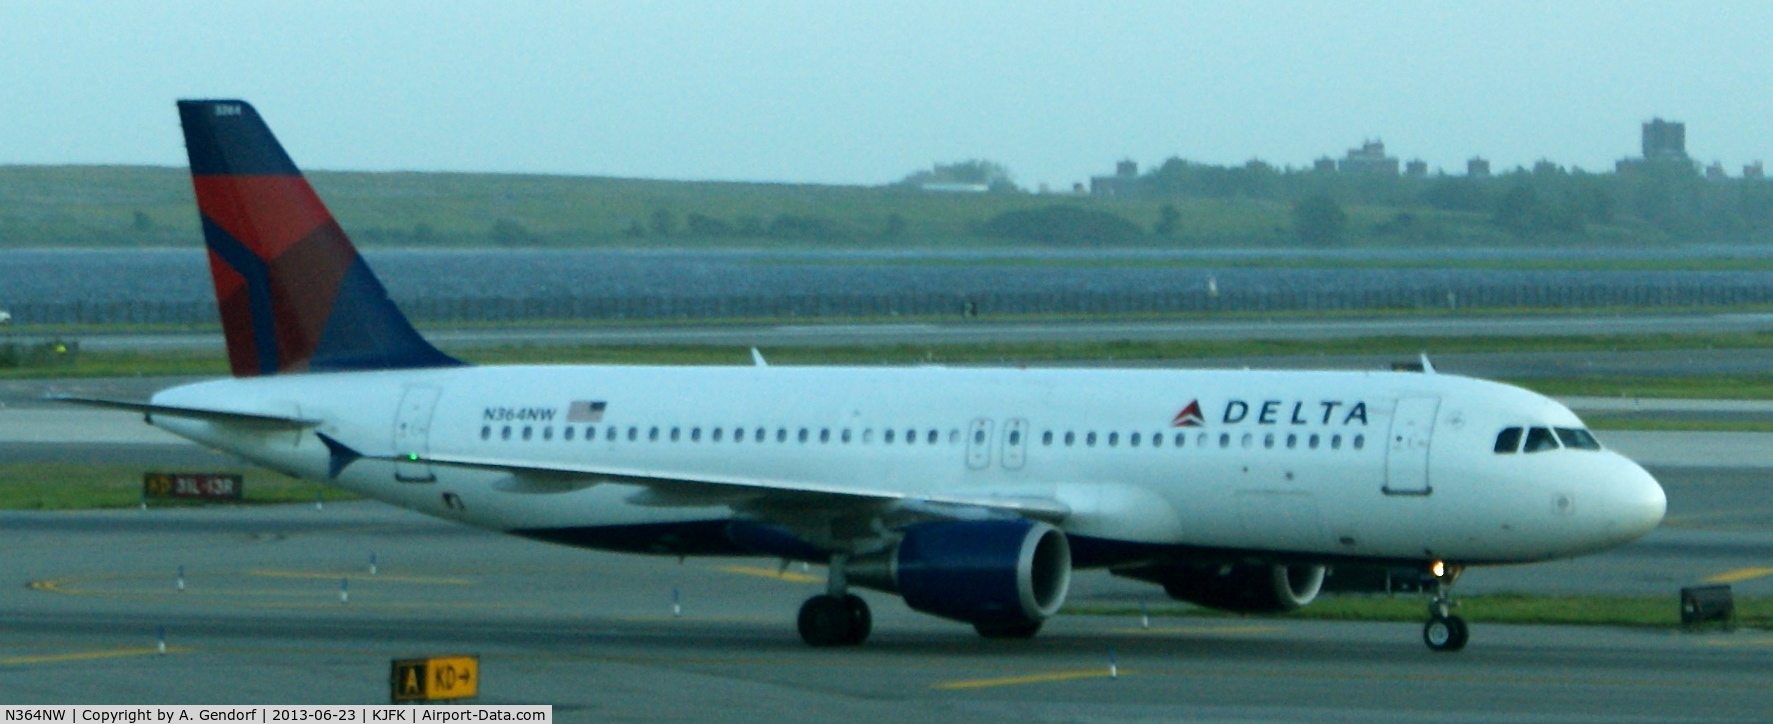 N364NW, 1999 Airbus A320-212 C/N 0962, Delta, is seen here taxiing after landing at New York - JFK(KJFK)